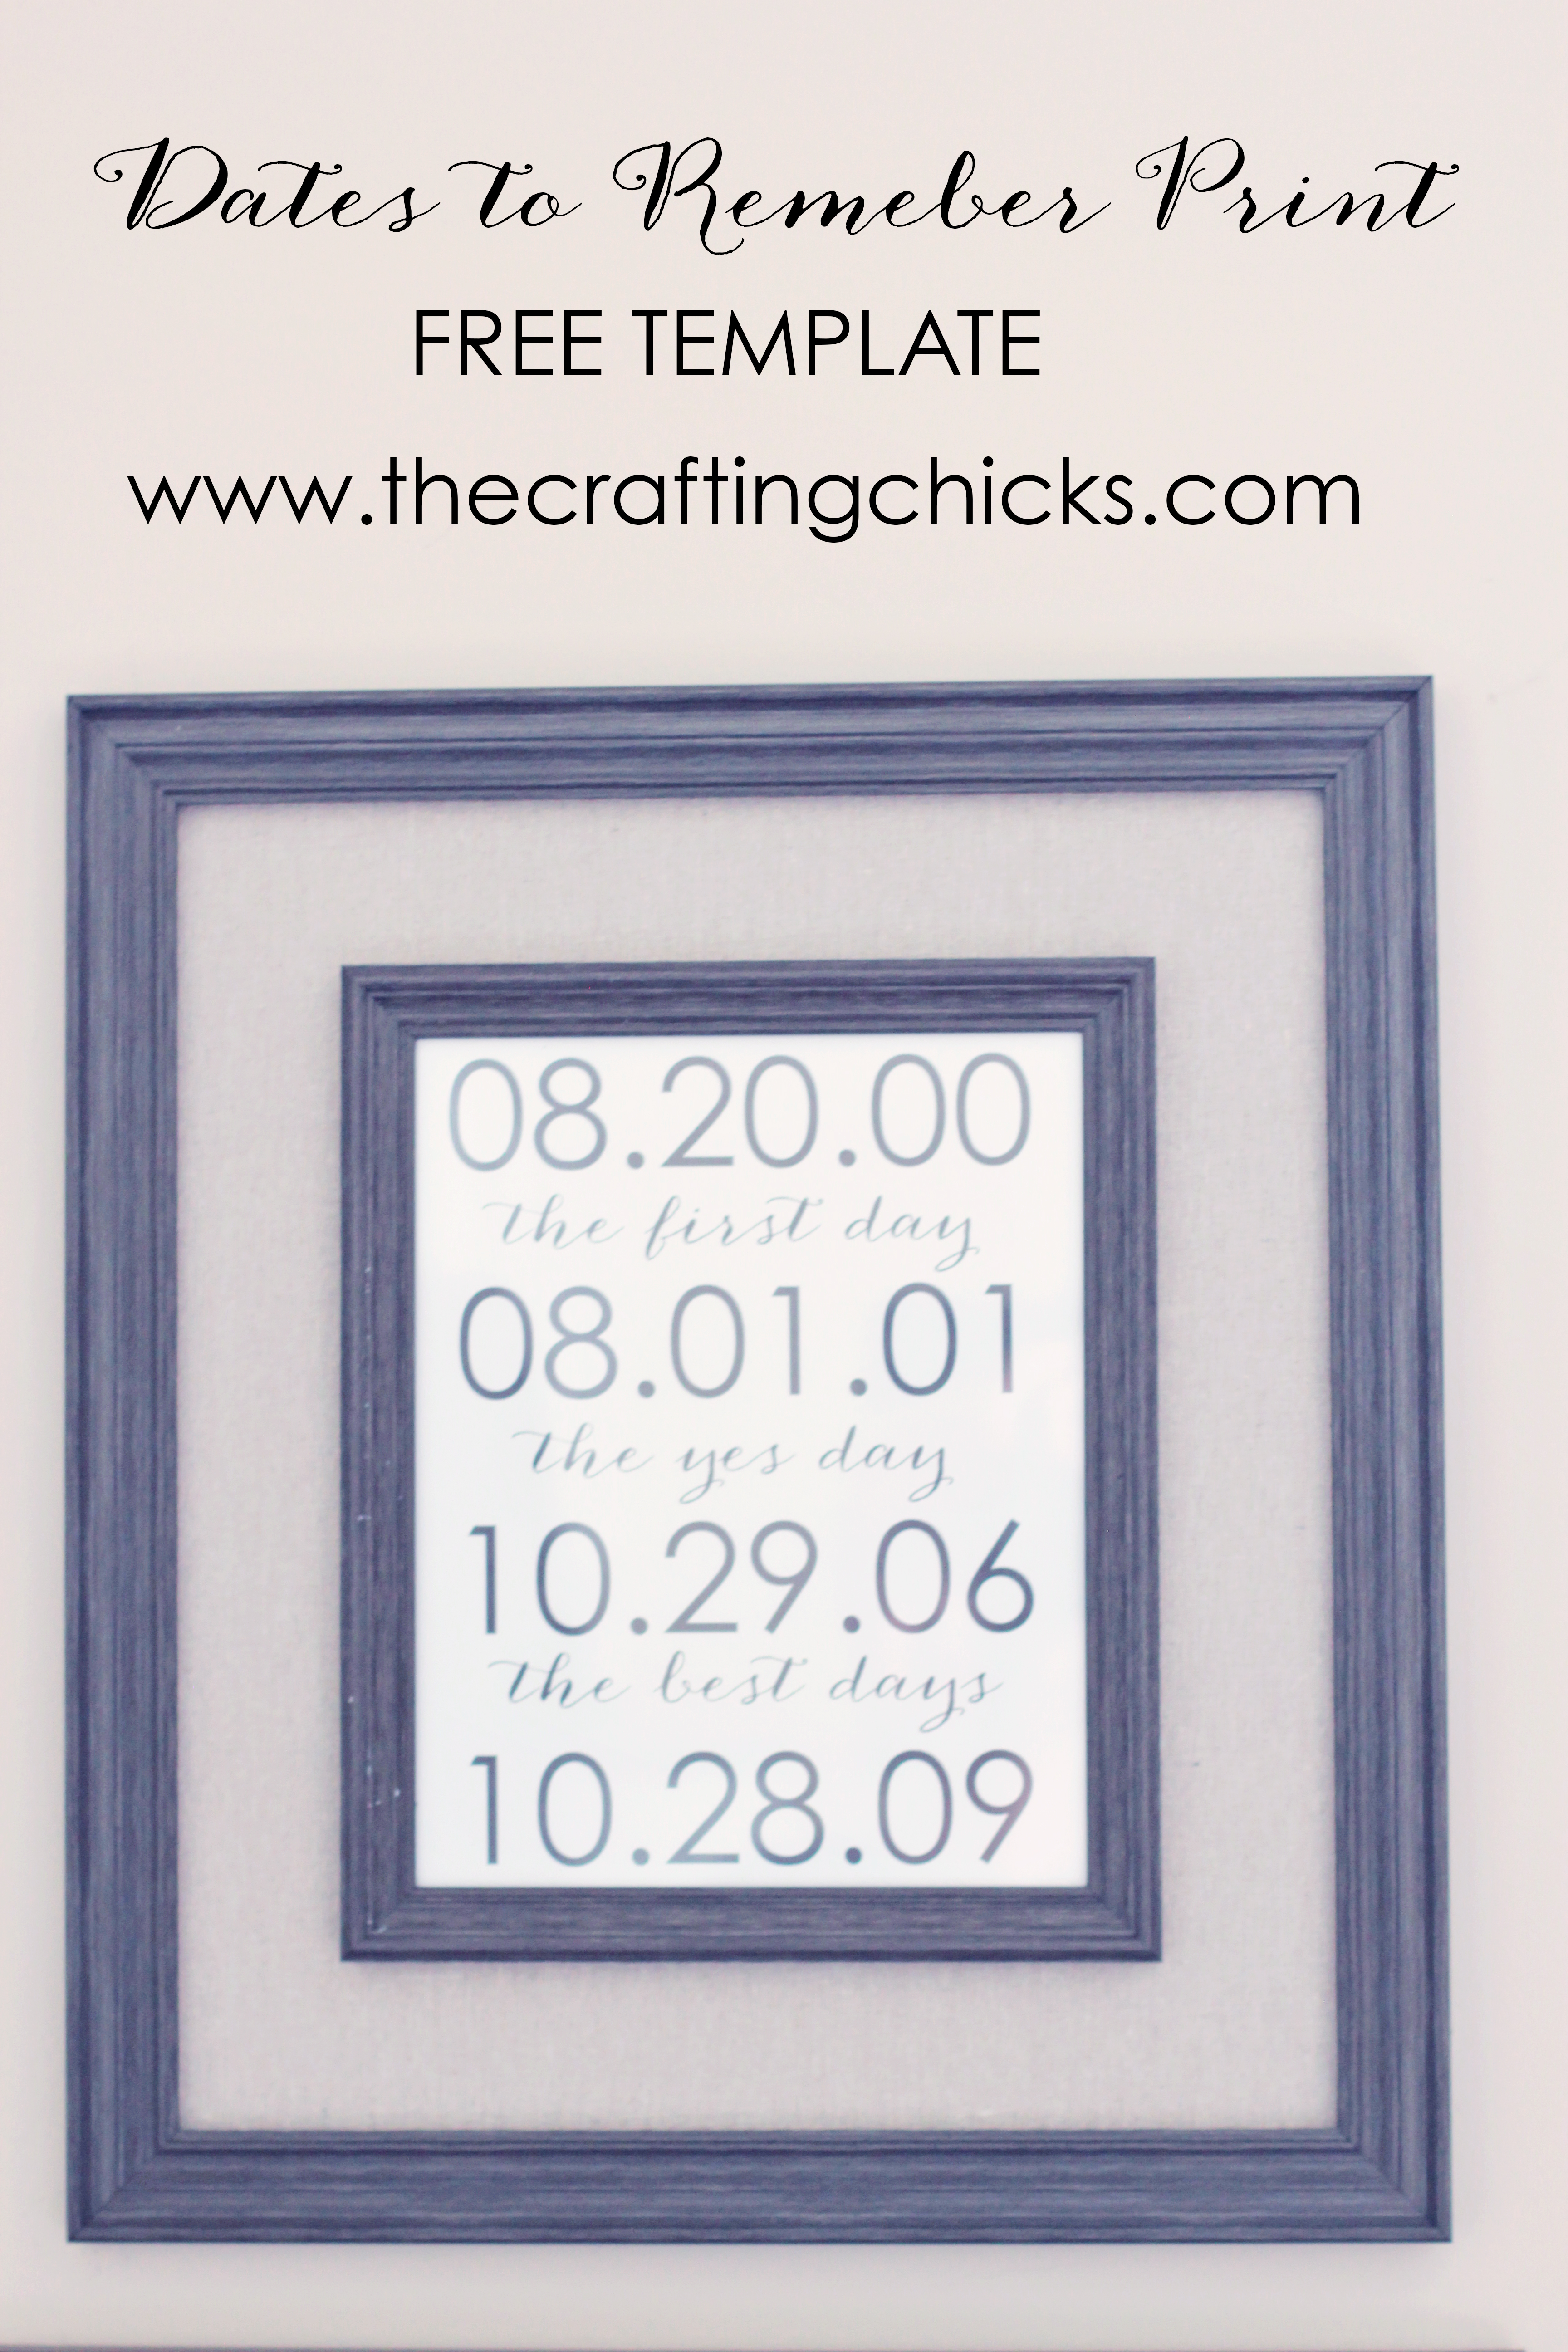 Dates to Remember Free Printable. Add your wedding date and birthdates of your children for special home decor.